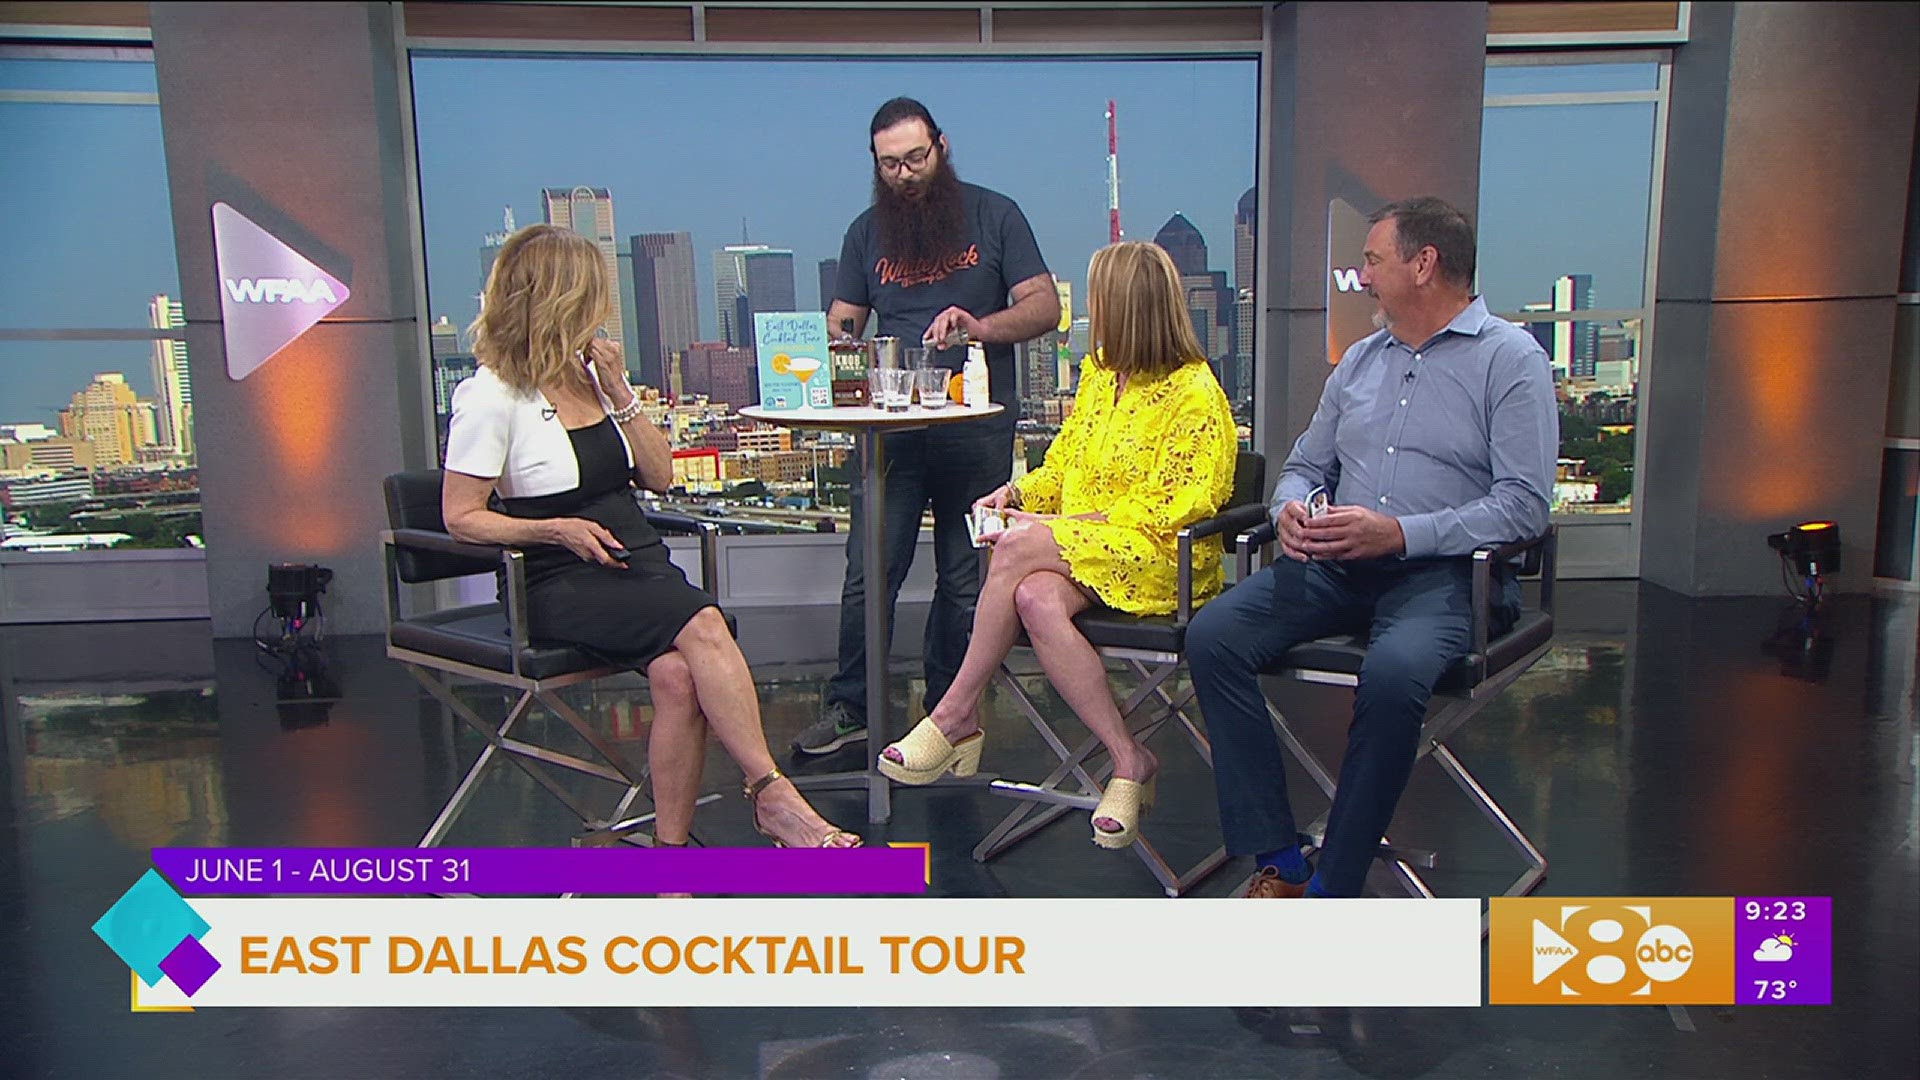 East Dallas is home to the most vibrant cocktail scene and the East Dallas Cocktail Tour Passport kicks off this Thursday!